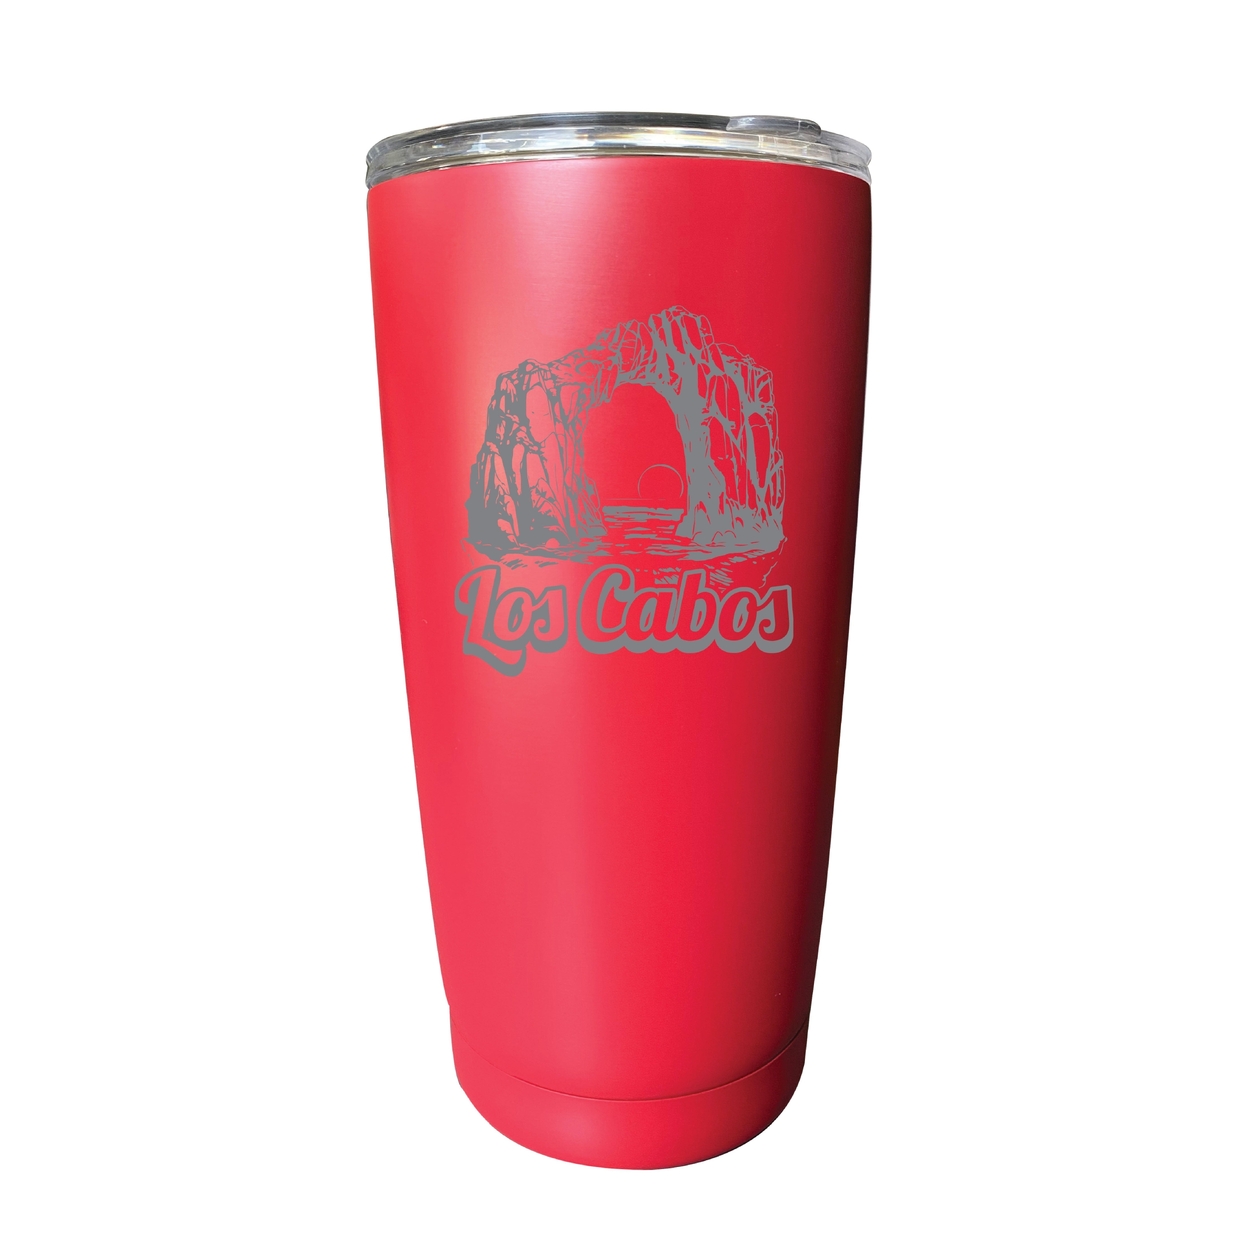 Los Cabos Mexico Souvenir 16 Oz Engraved Stainless Steel Insulated Tumbler - Pink,,Single Unit